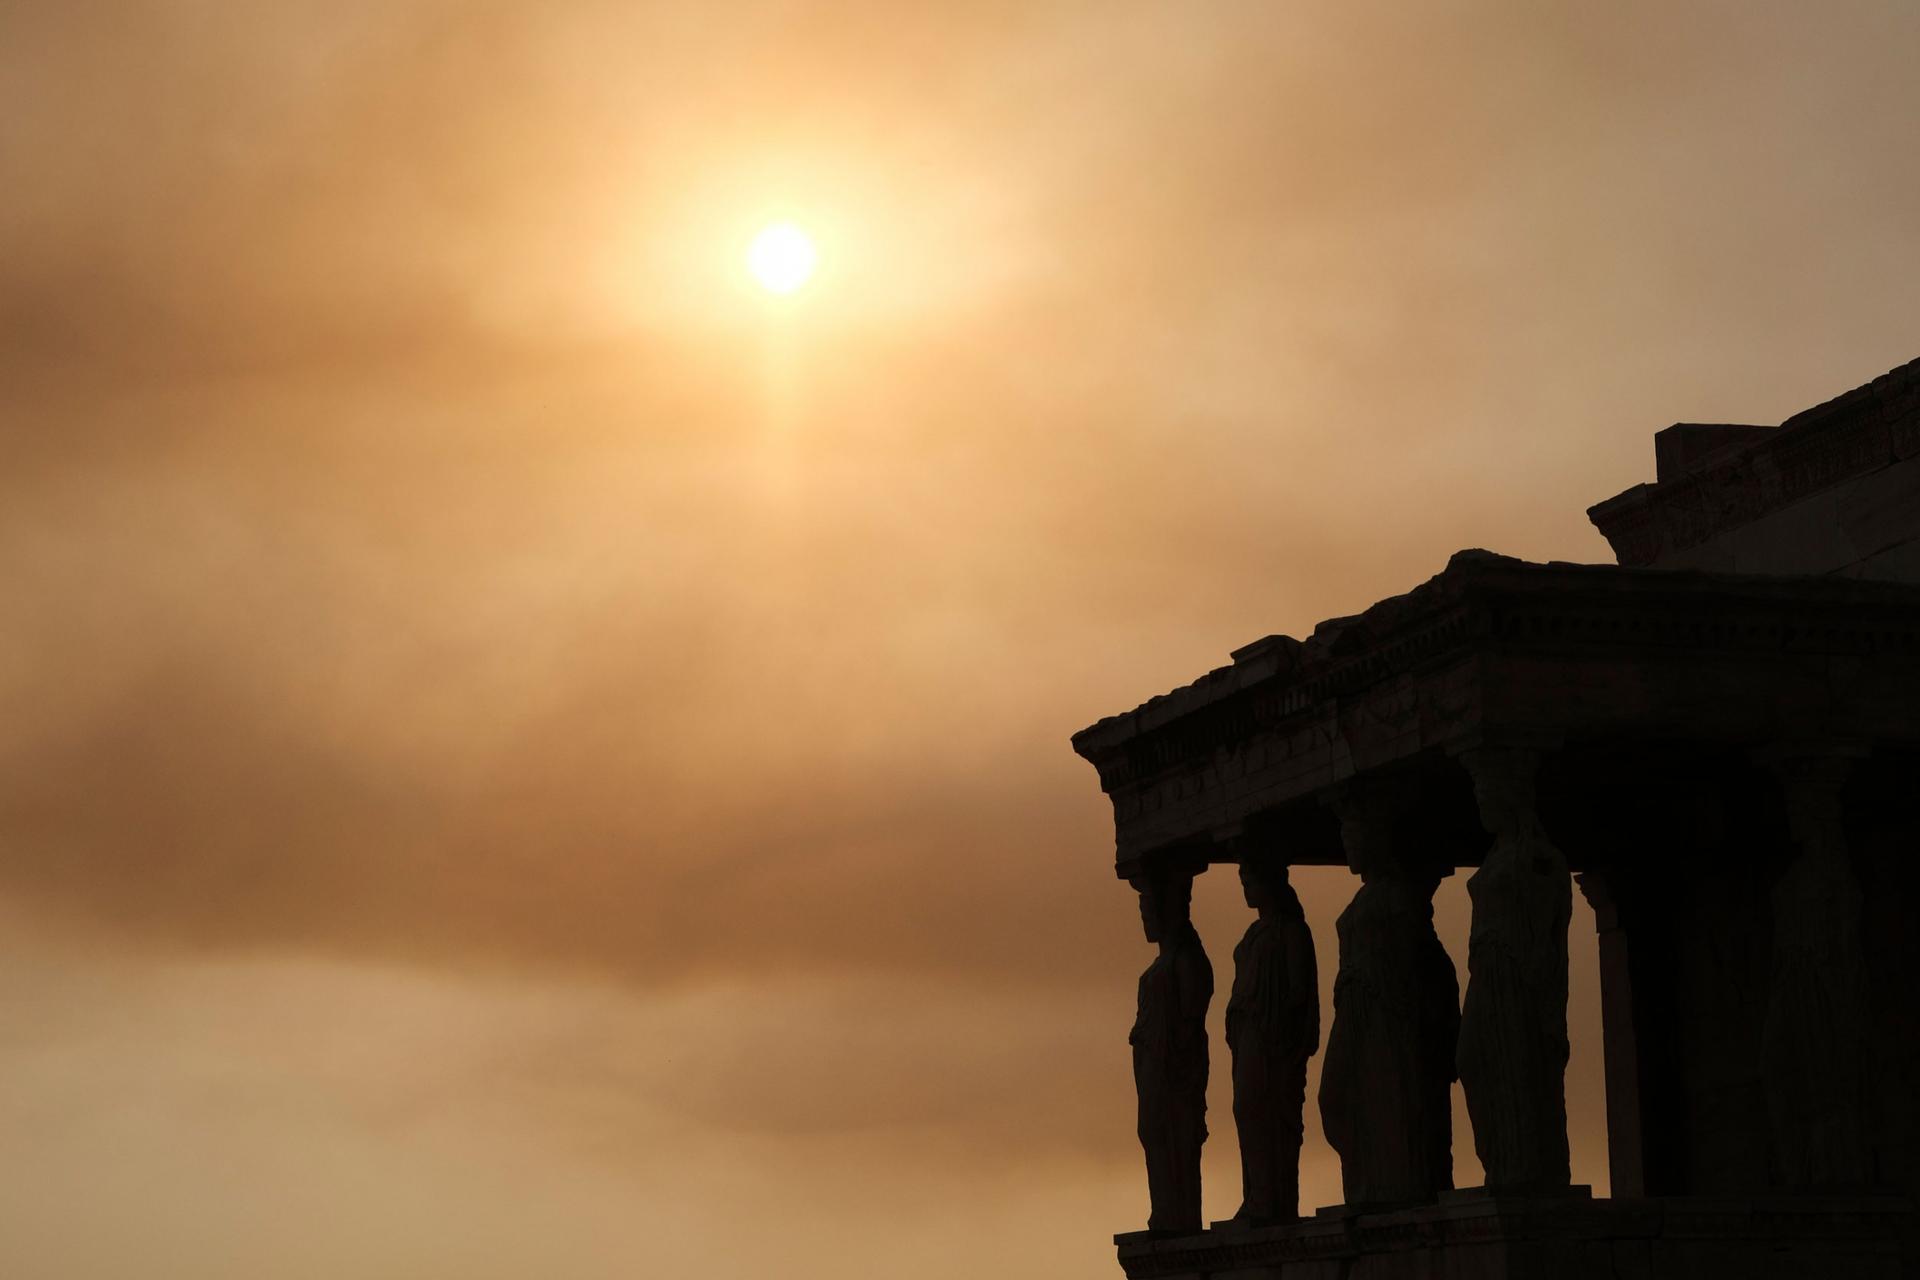 The columns of the Acropolis are shown in shadown with the sun in the distance blocked by smoke clouds.